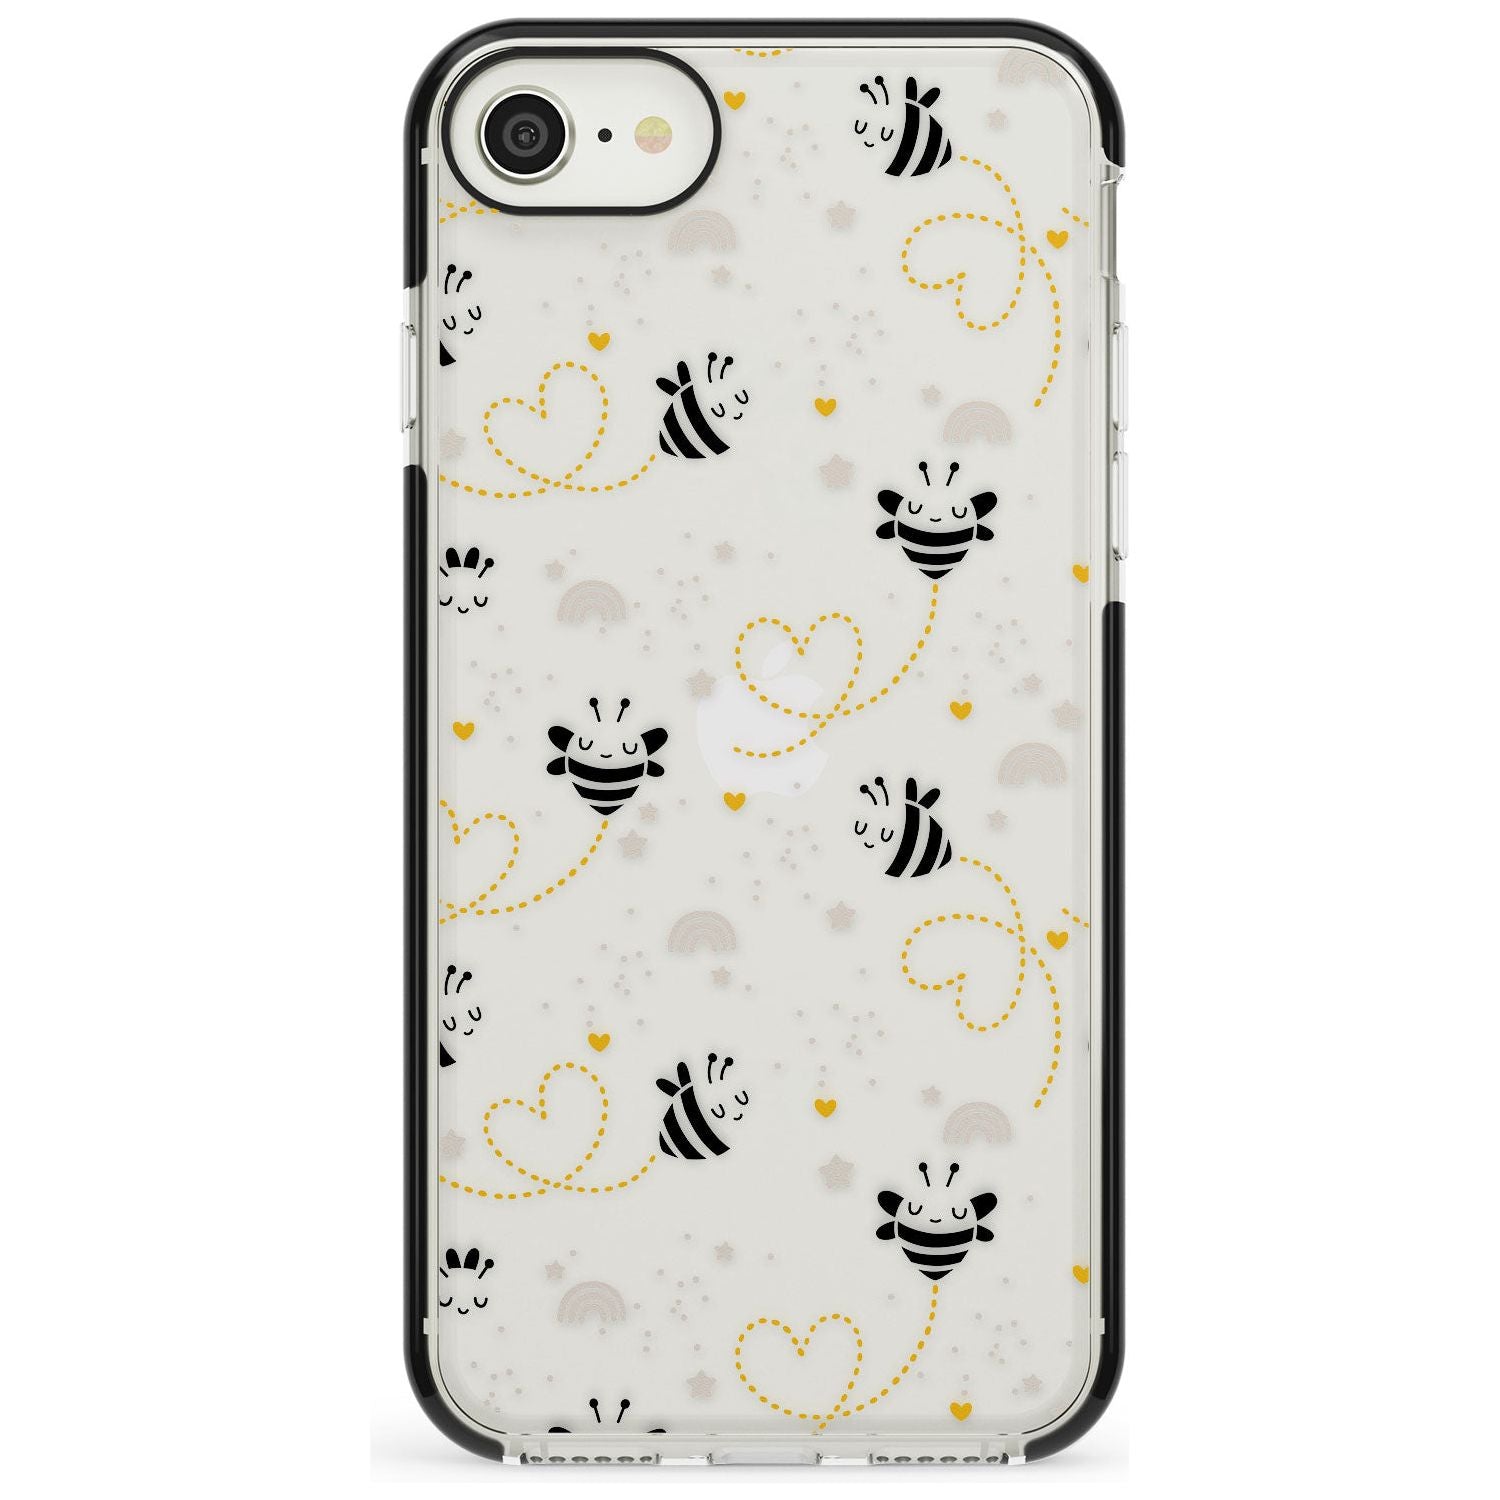 Sweet as Honey Patterns: Bees & Hearts (Clear) Black Impact Phone Case for iPhone SE 8 7 Plus